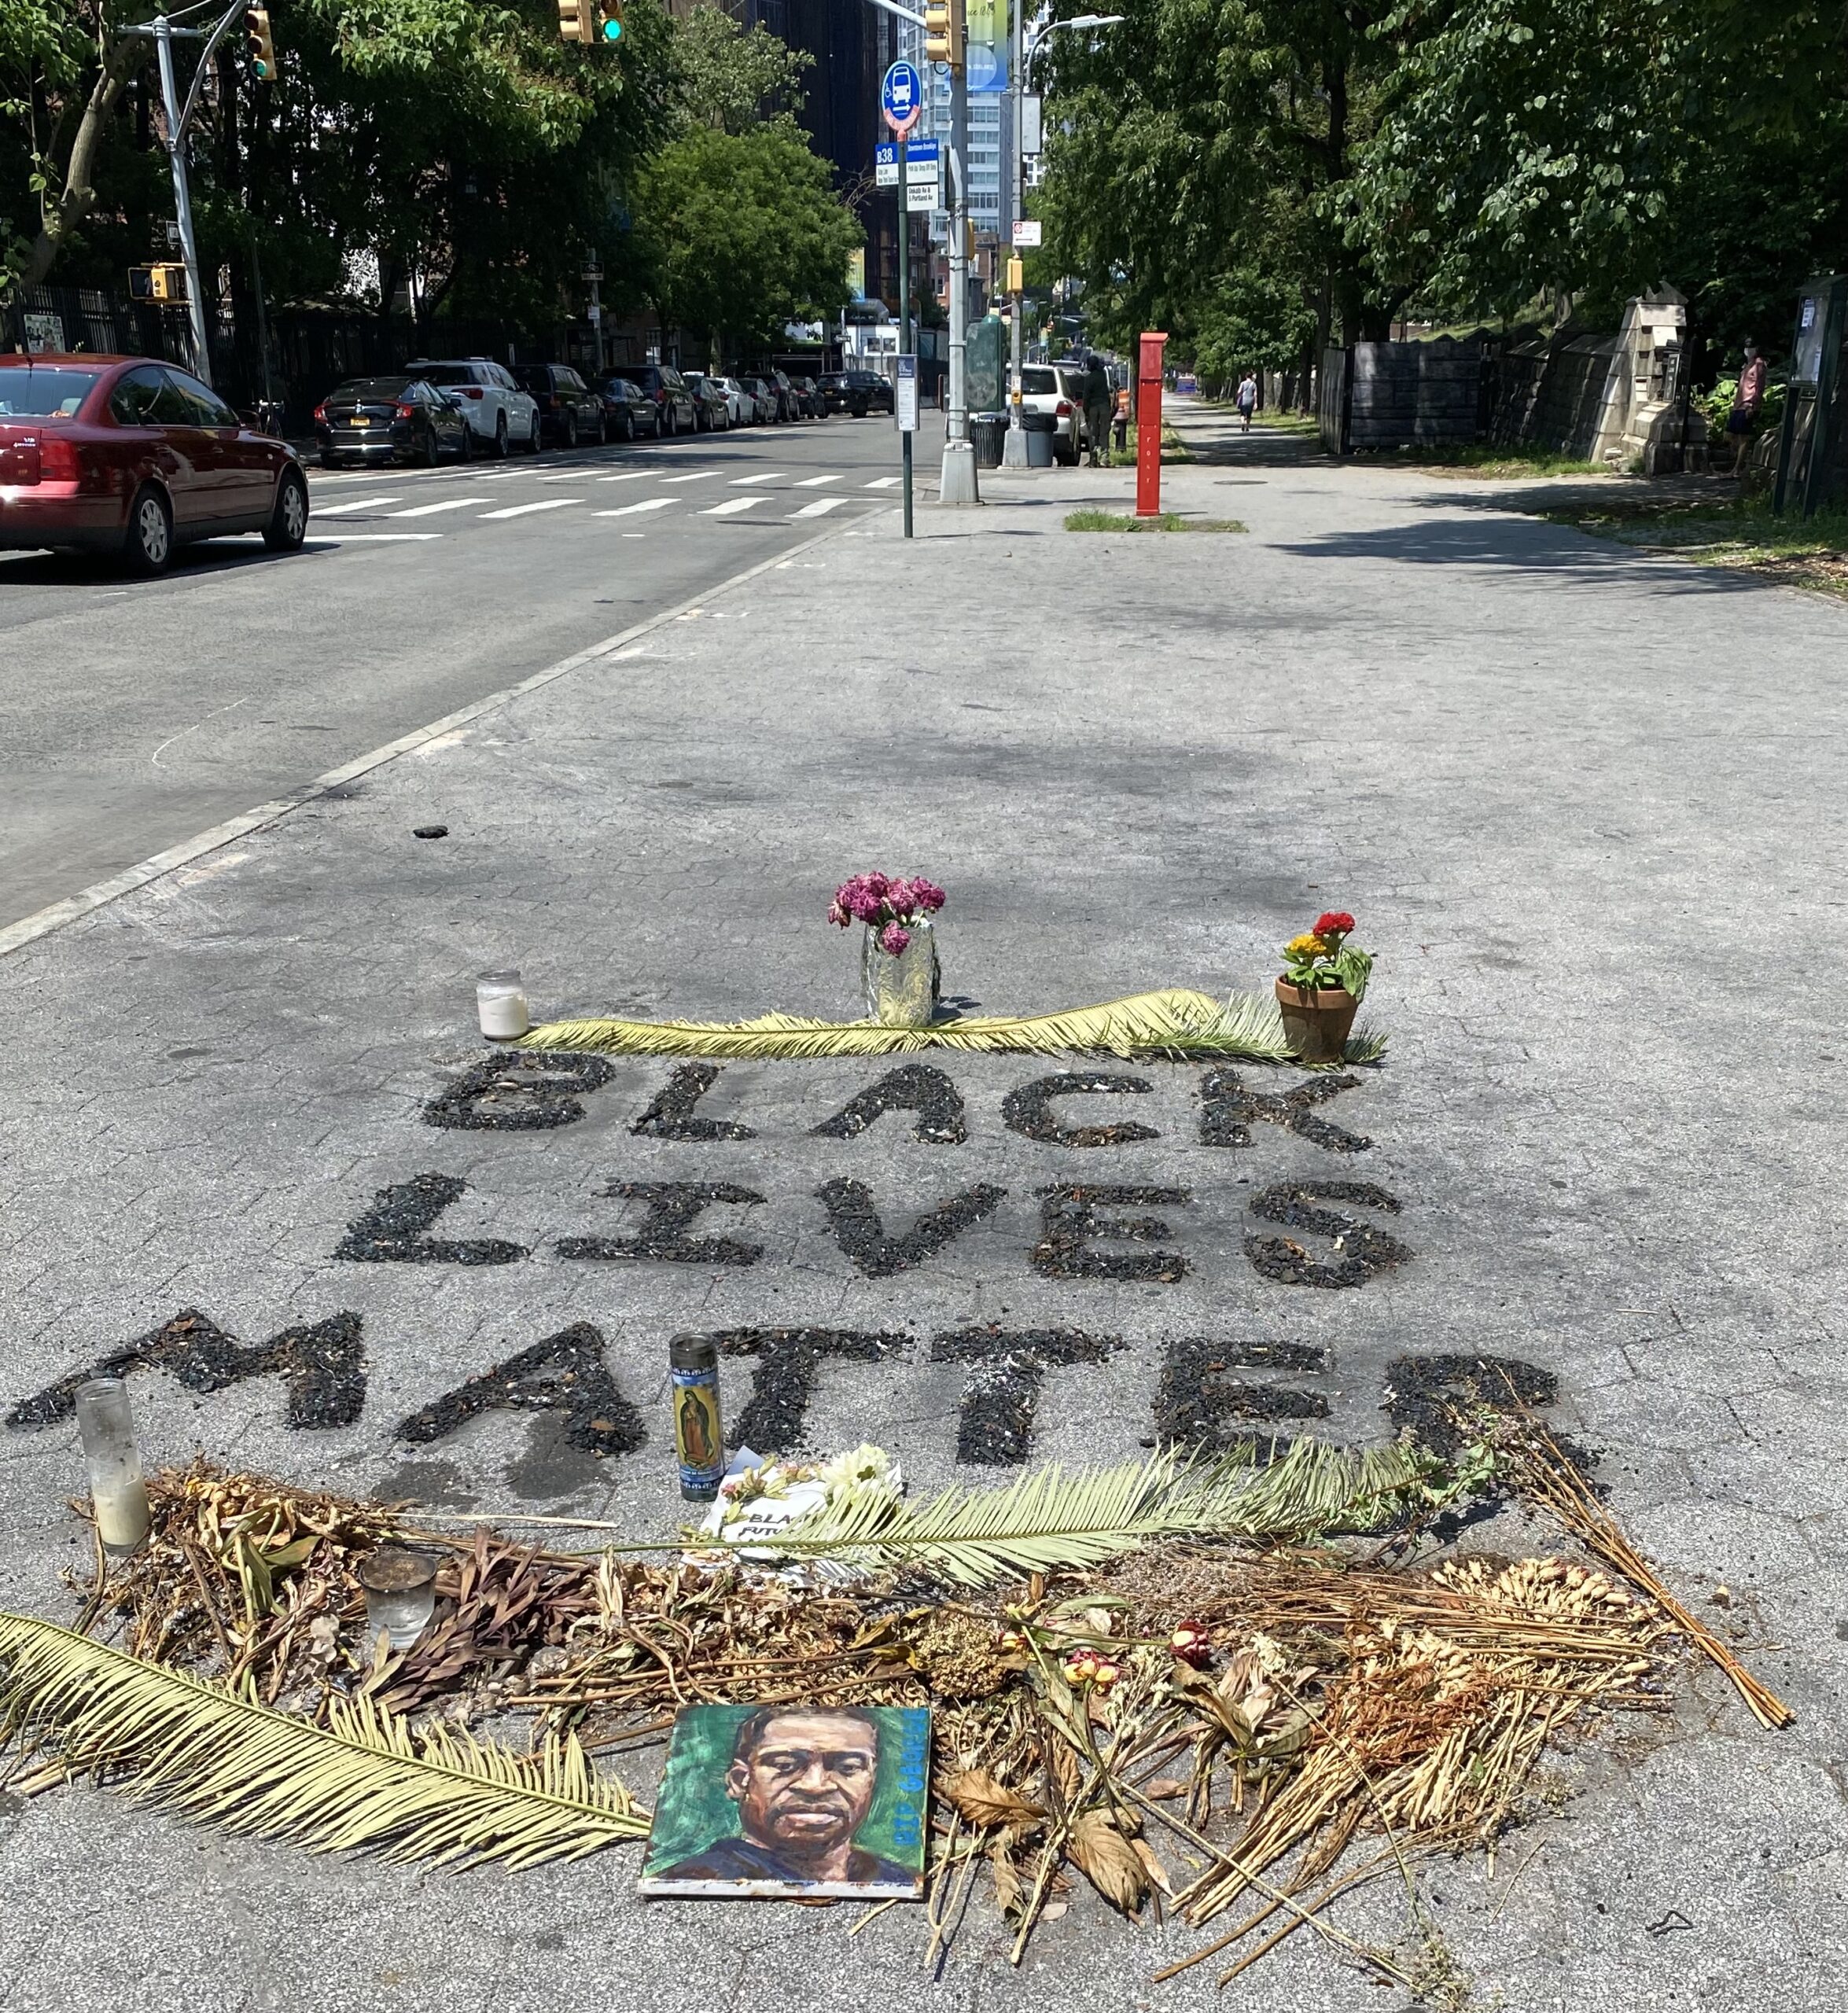 Image of Black Lives Matter written on the ground with dry flowers and a picture of George Floyd.